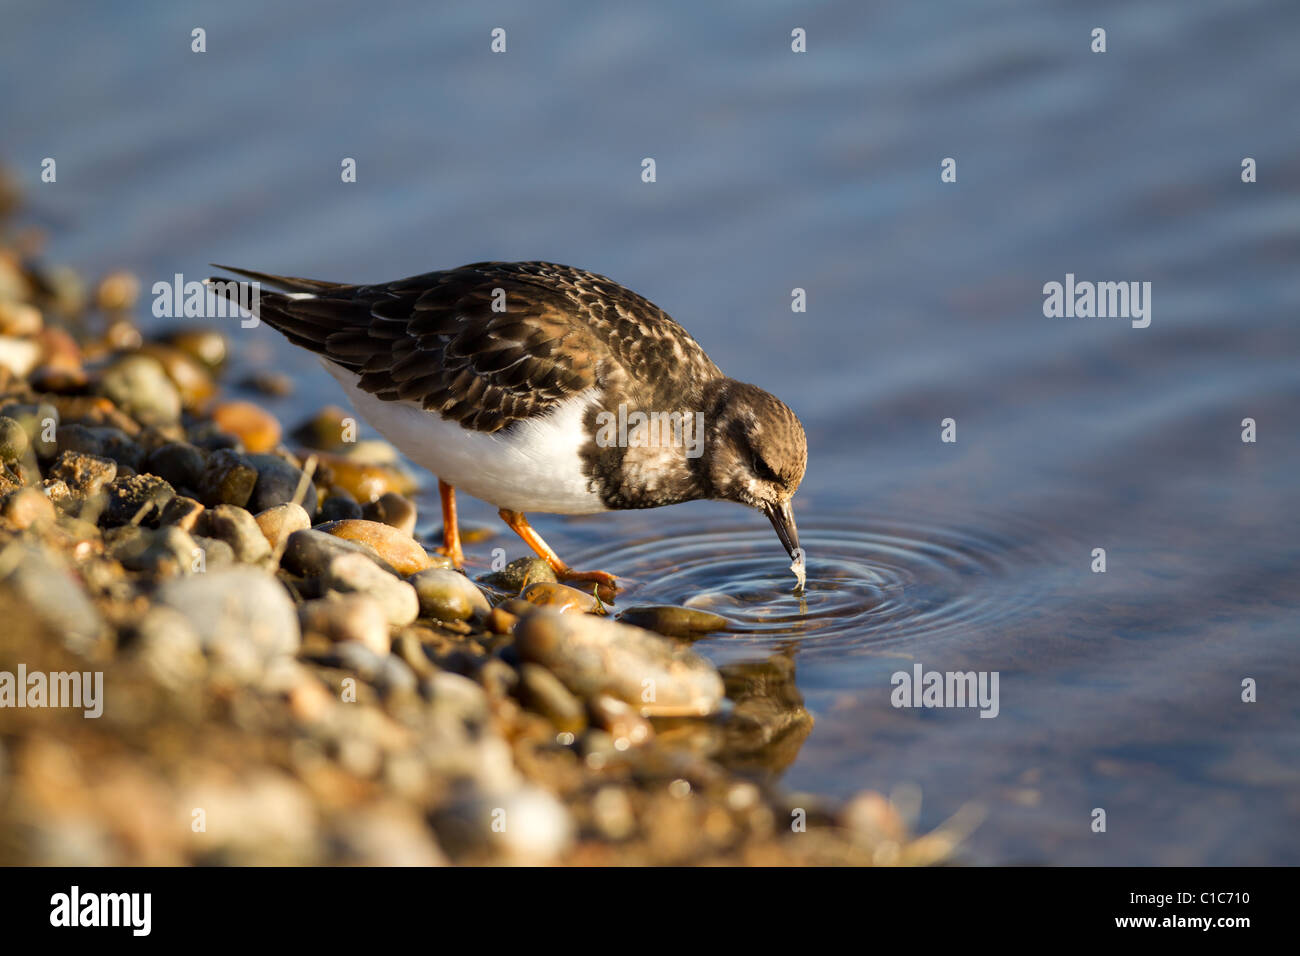 The Ruddy Turnstone (Arenaria interpres) is a small wading bird, one of two species of turnstone in the genus Arenaria. Stock Photo